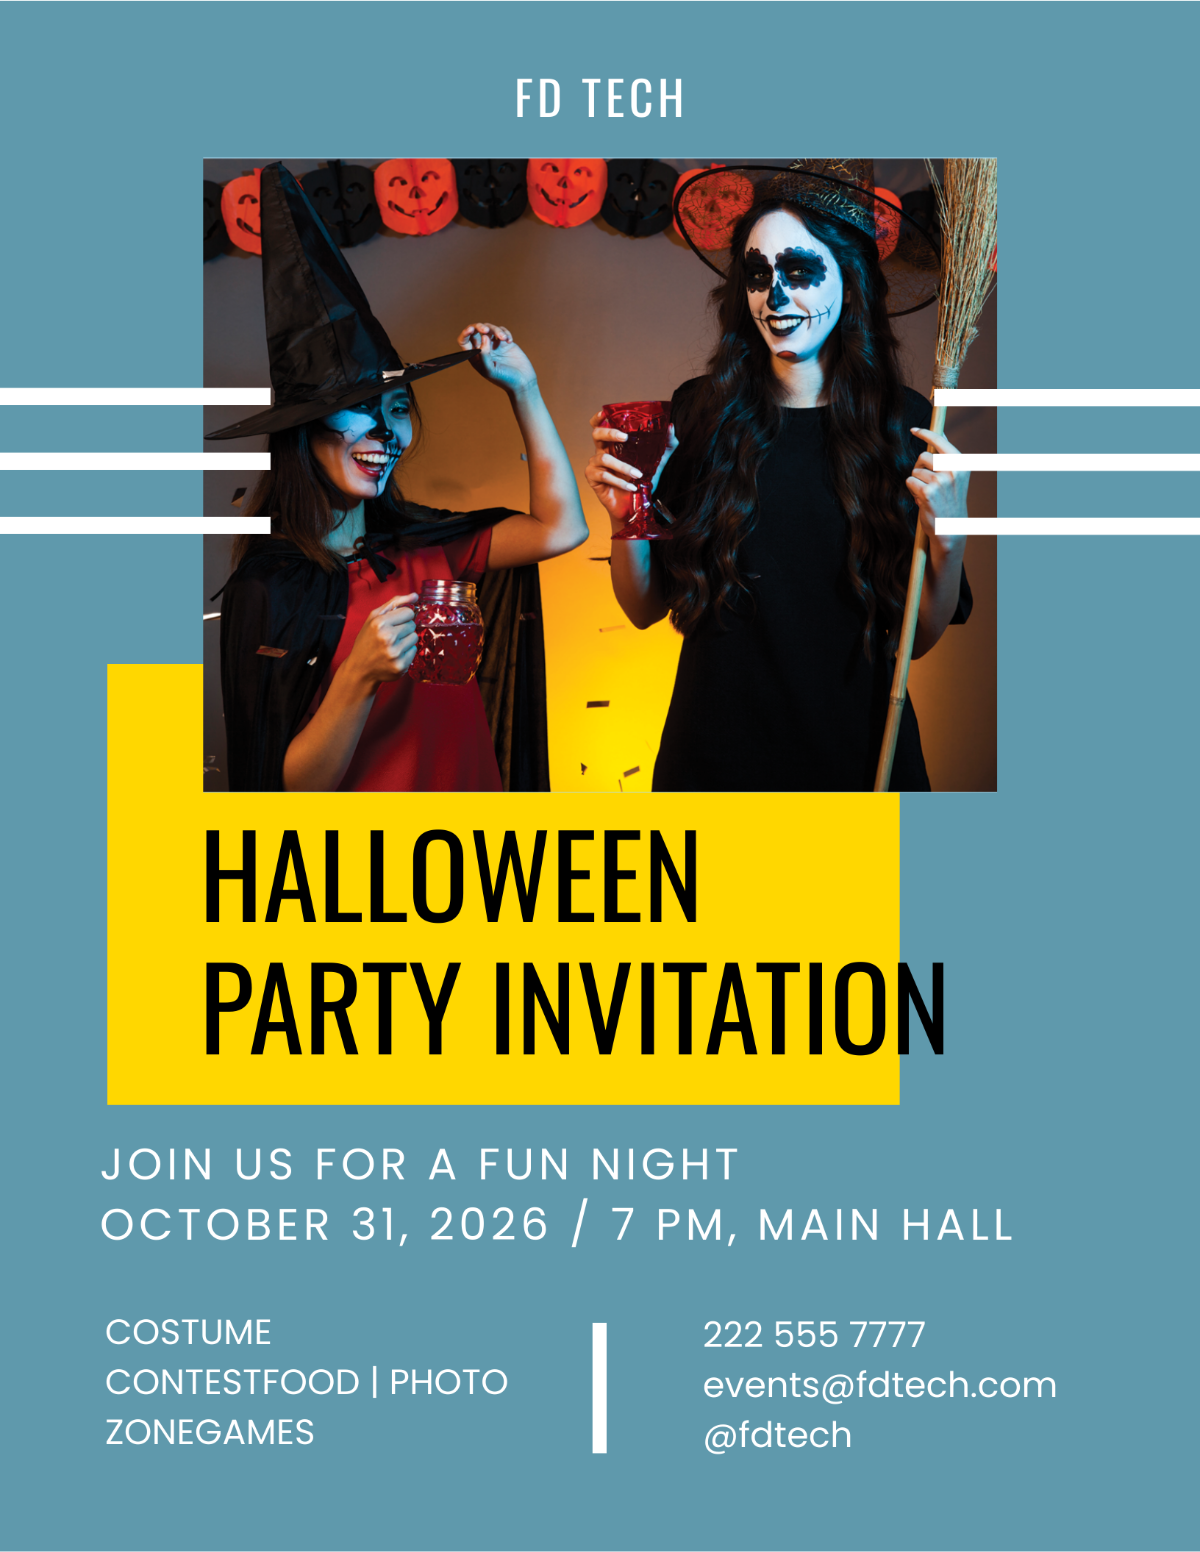 Halloween Office Party Flyer